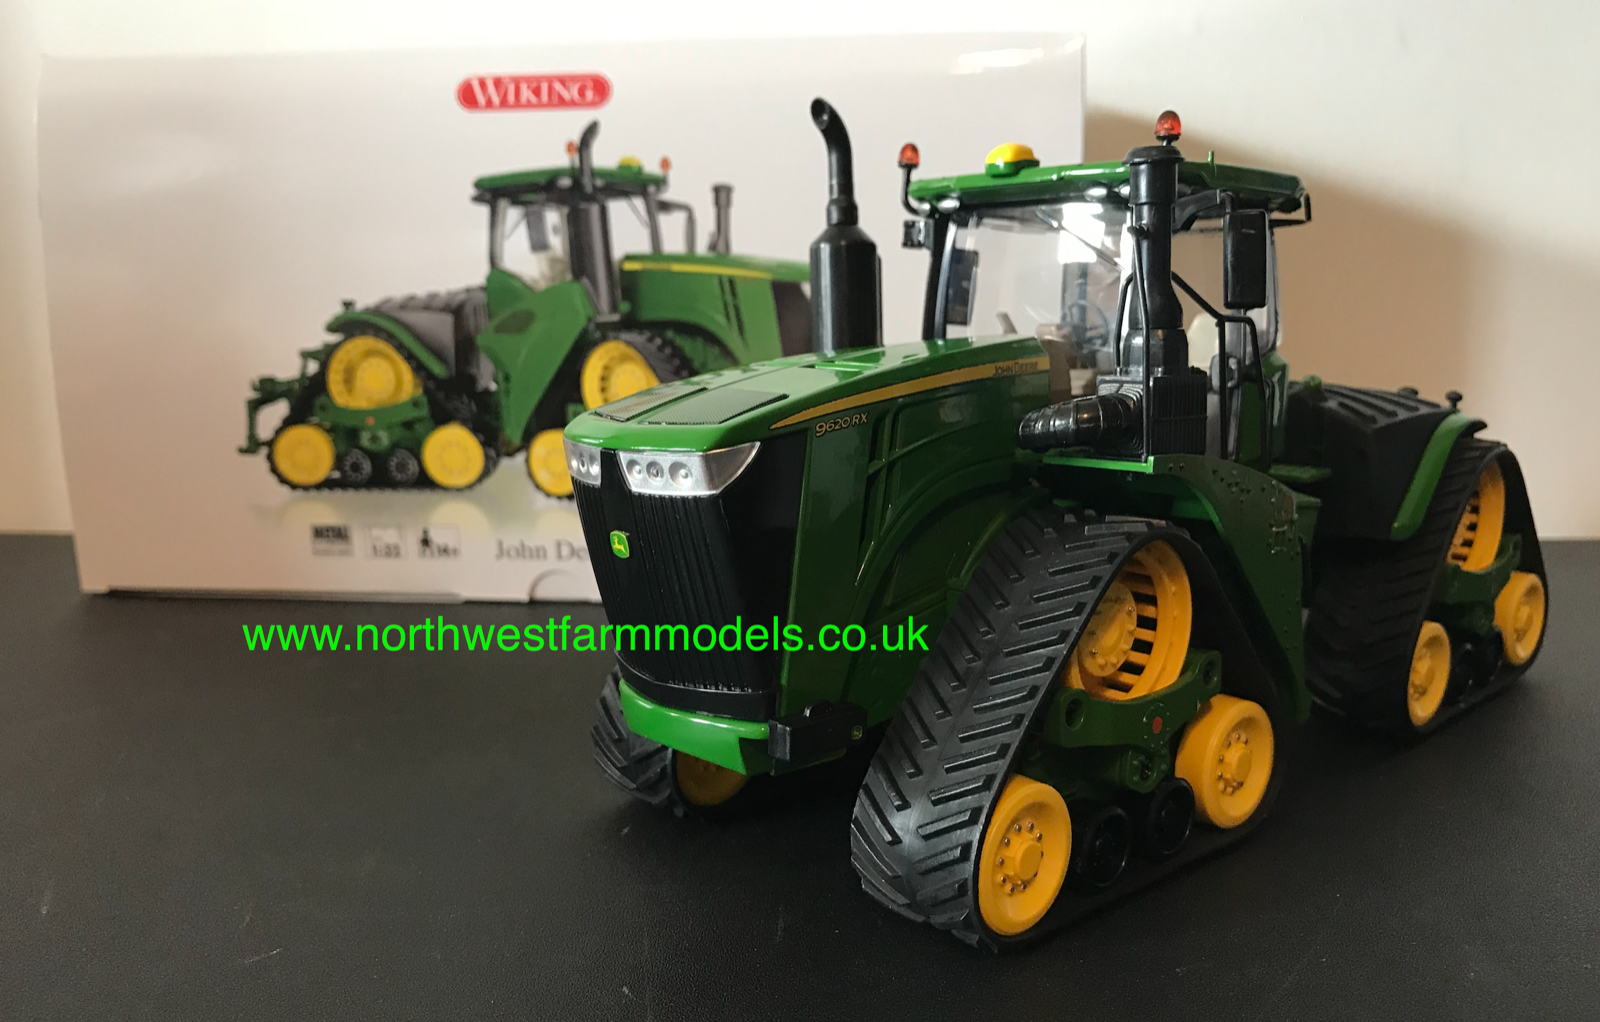 Wiking 1 32 John Deere 9620rx Articulated Tractor for sale online